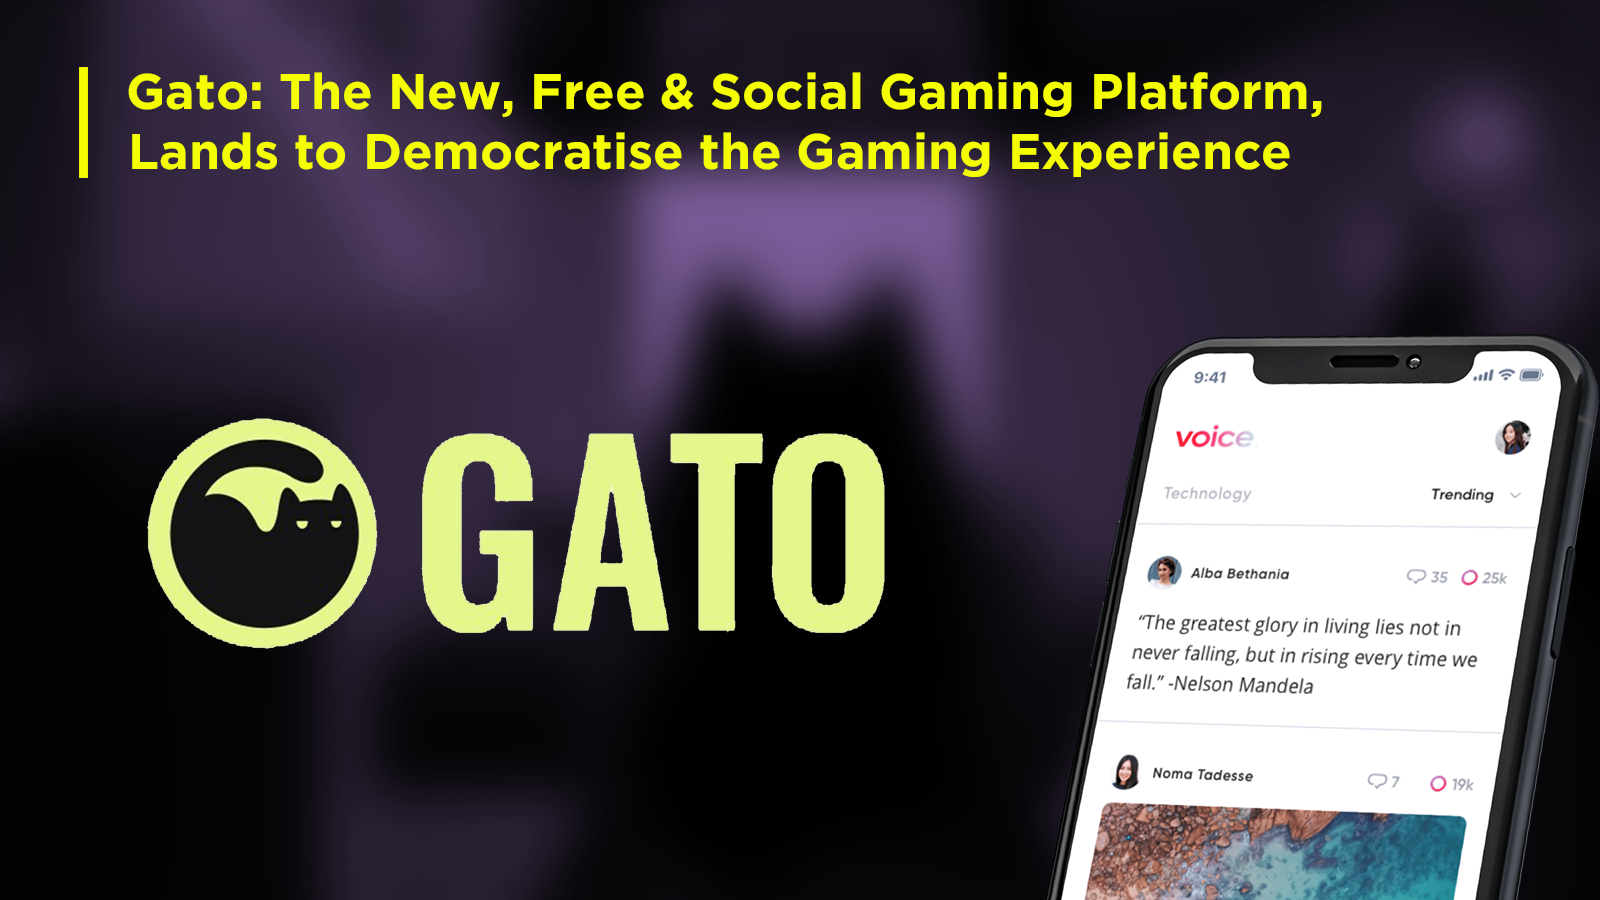 Gato: The New, Free & Social Gaming Platform, Lands to Democratise the Gaming Experience